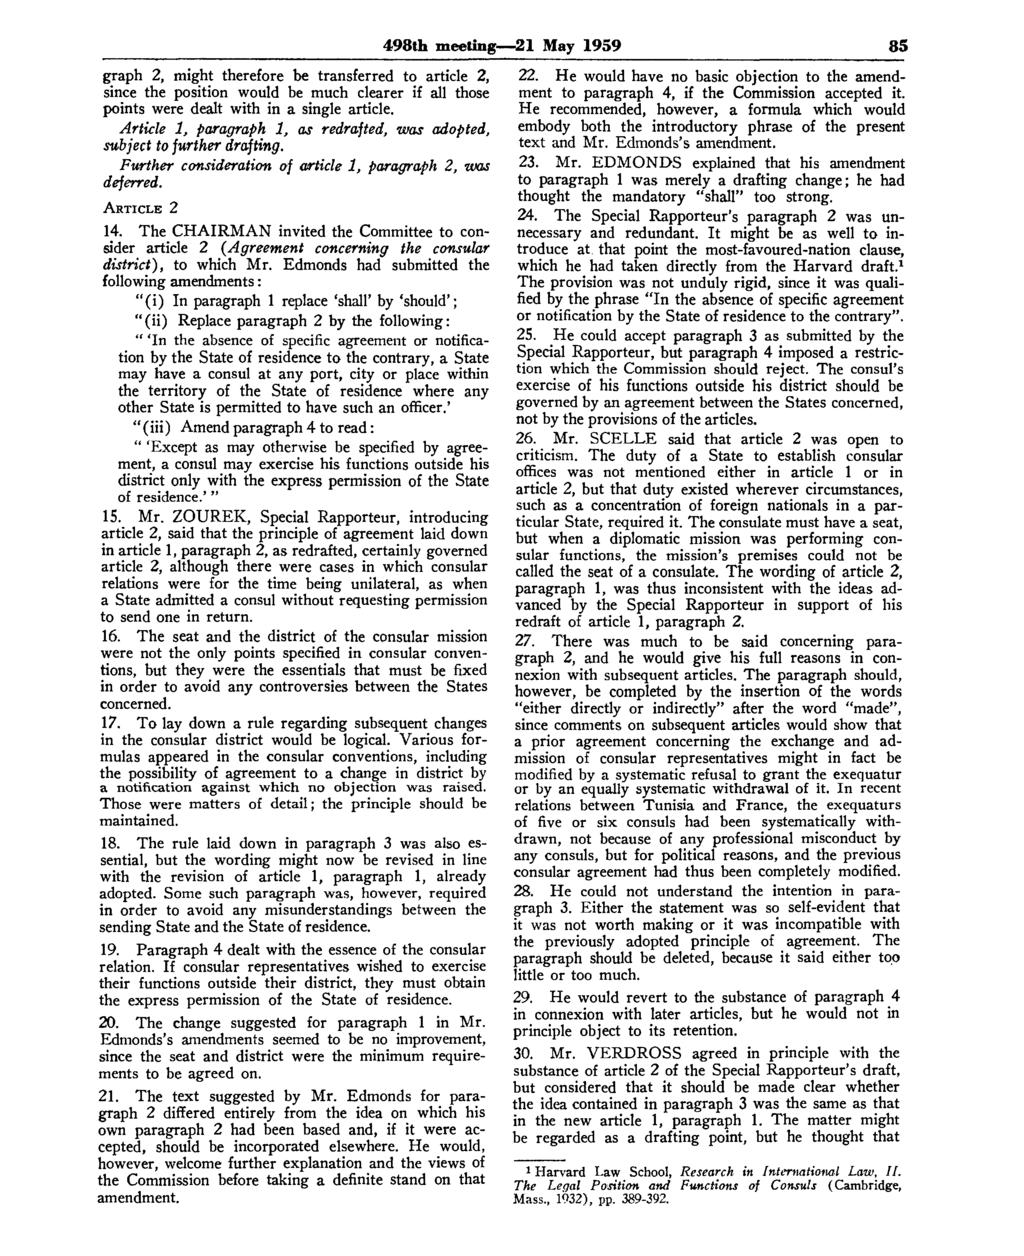 498th meeting 21 May 1959 85 graph 2, might therefore be transferred to article 2, since the position would be much clearer if all those points were dealt with in a single article.